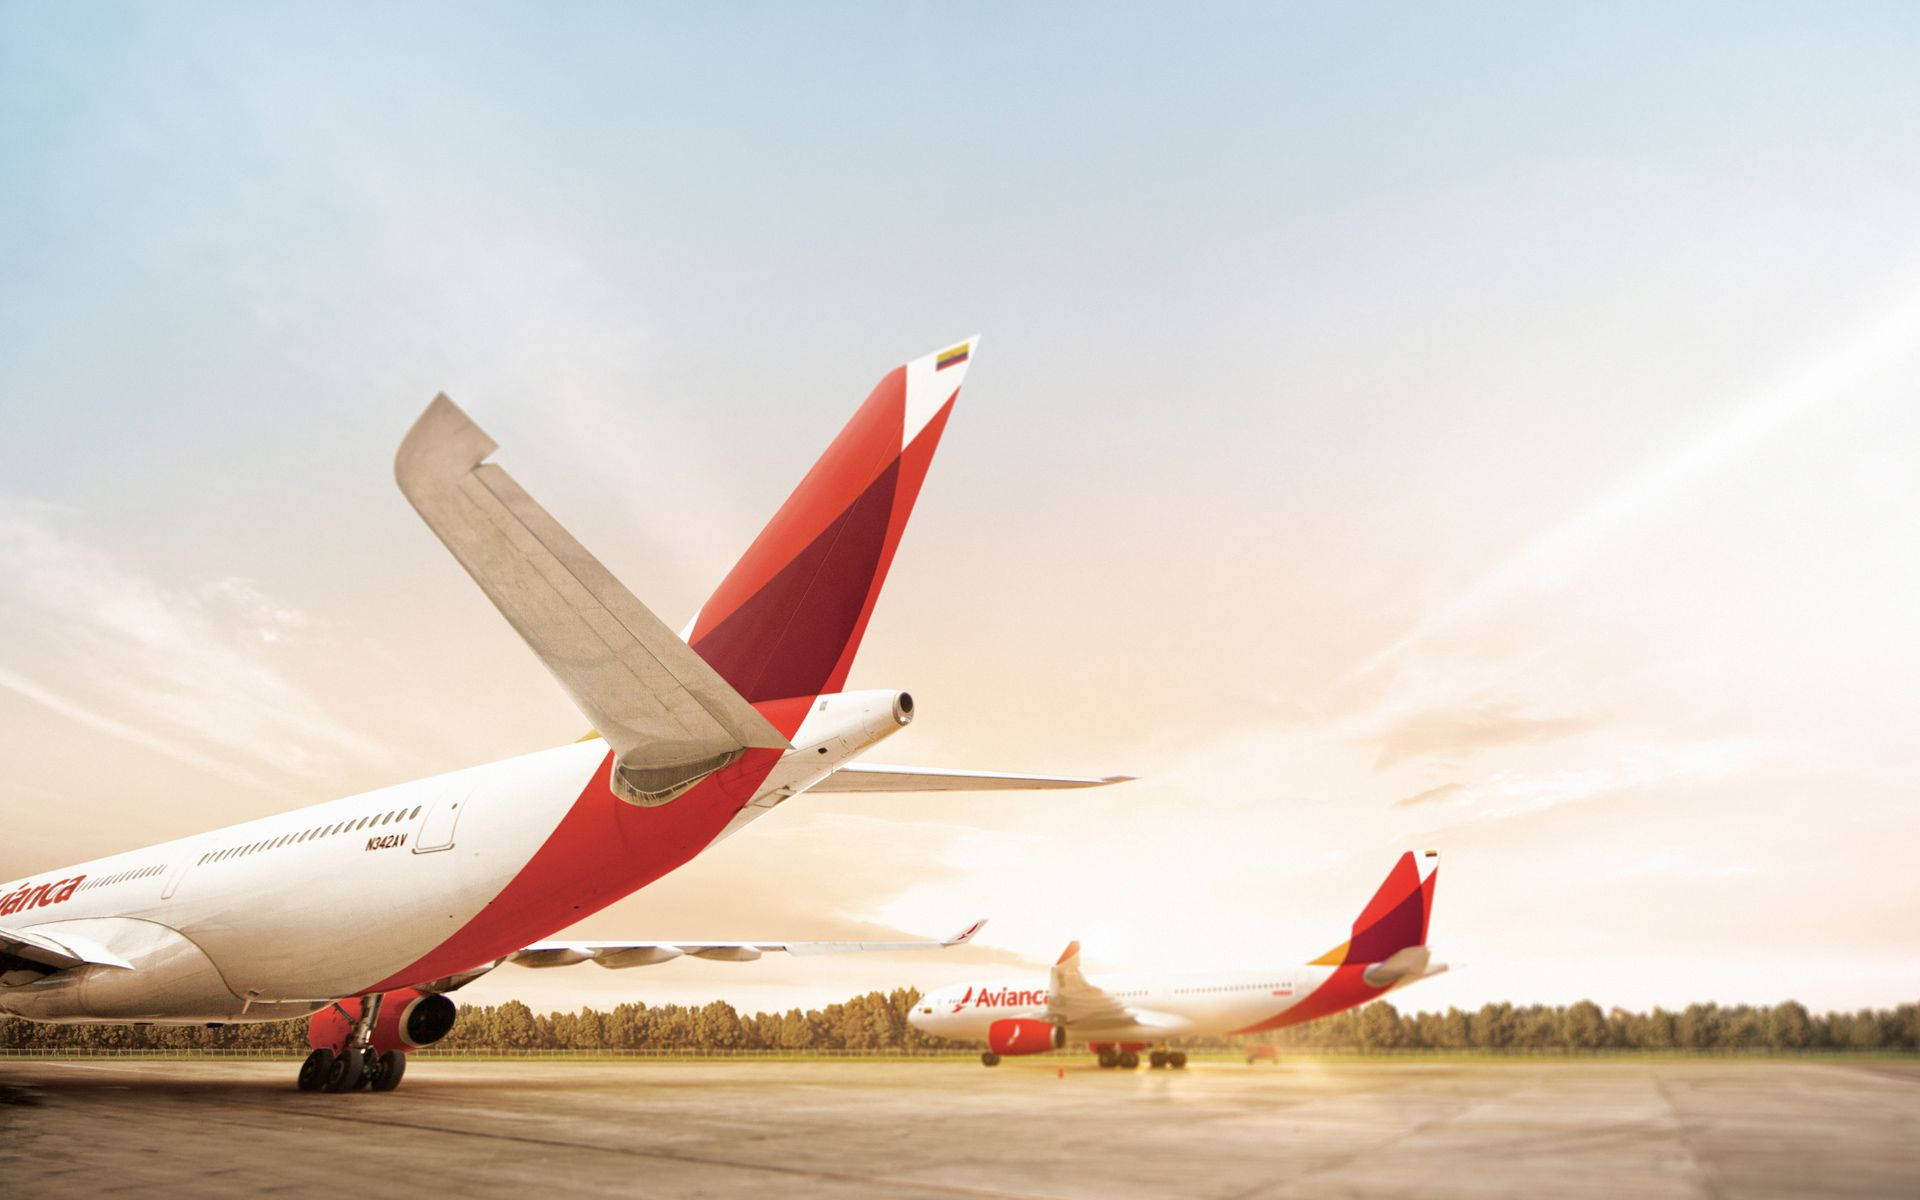 Avianca Airline Planes At Sunset Wallpaper